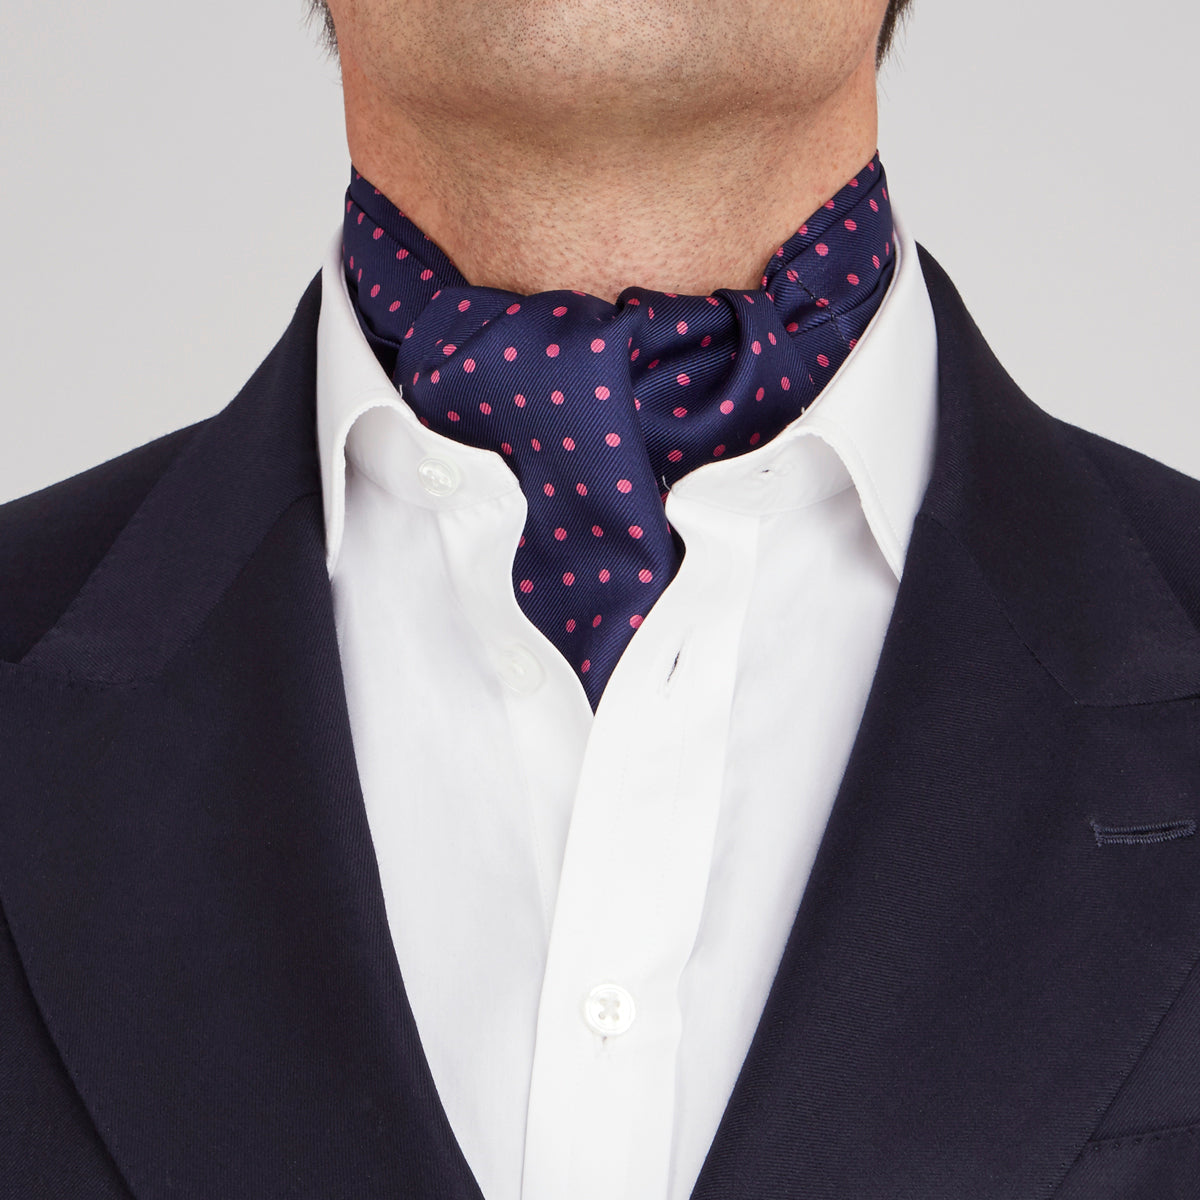 Navy and Pink Spot Silk Ascot Tie